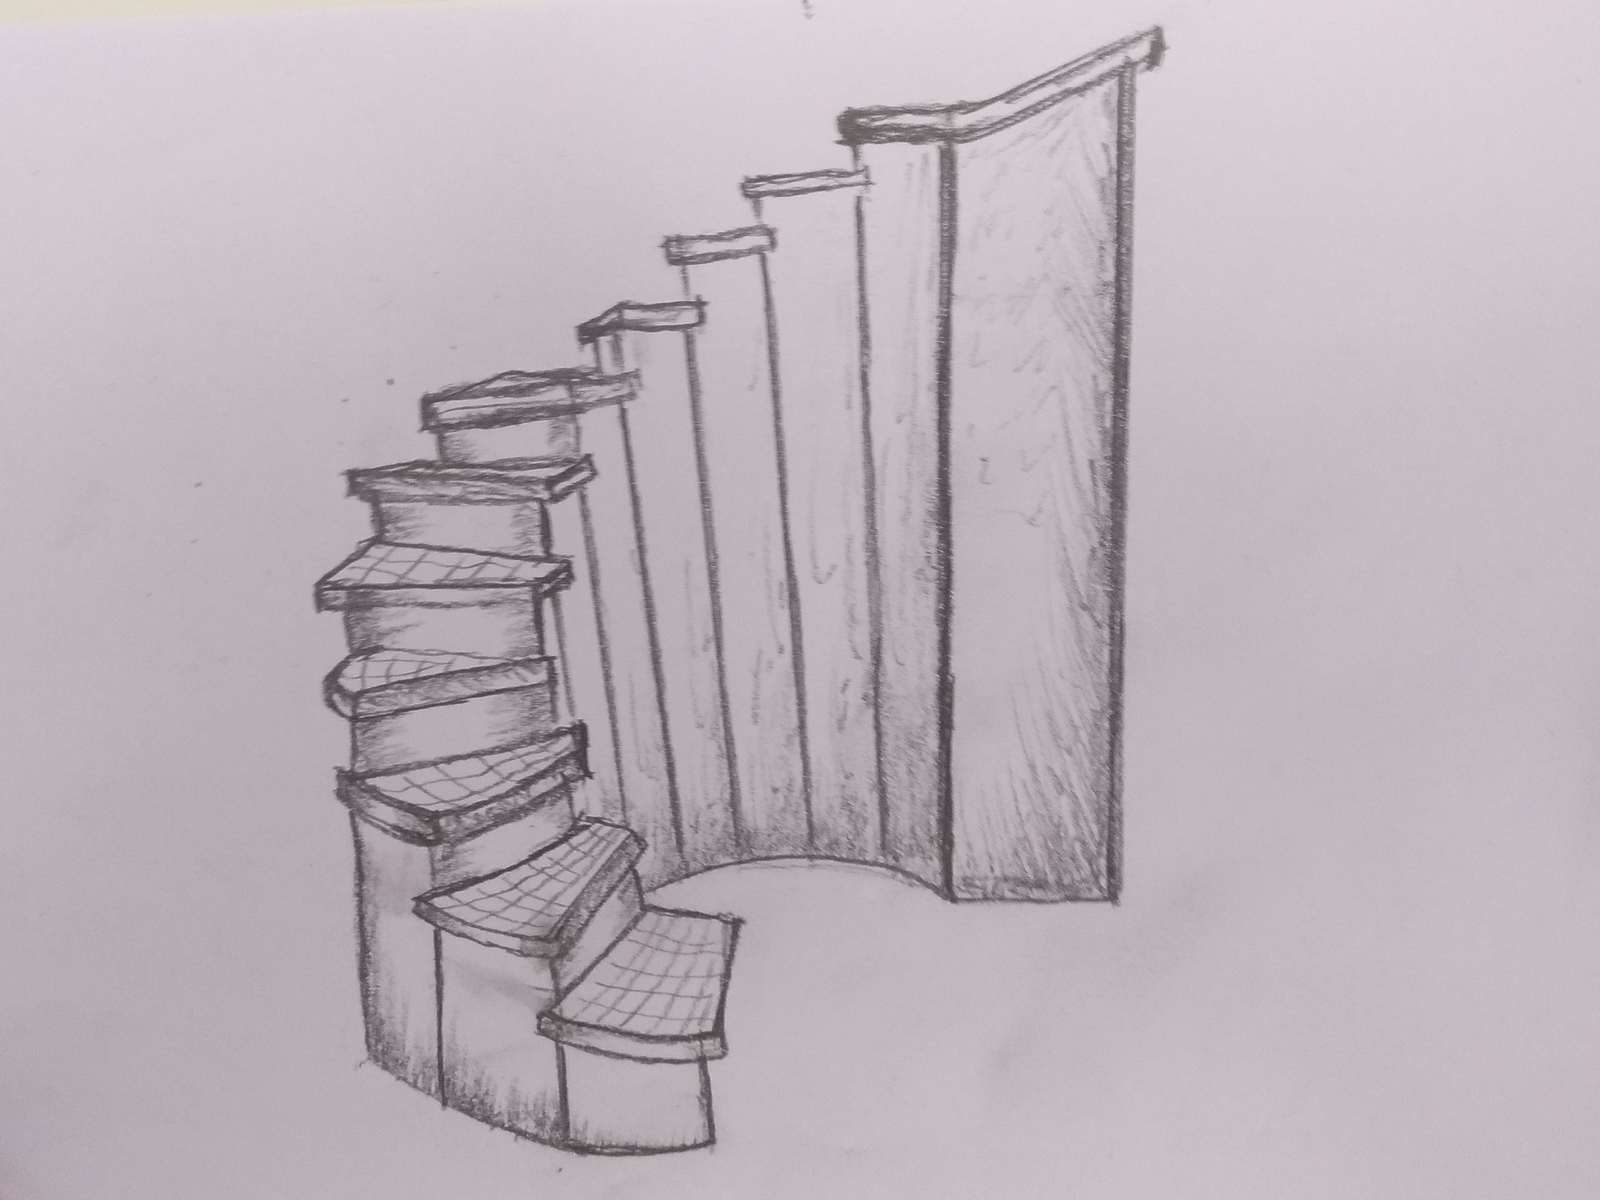 Components or Parts of a Staircase Know Before You Design